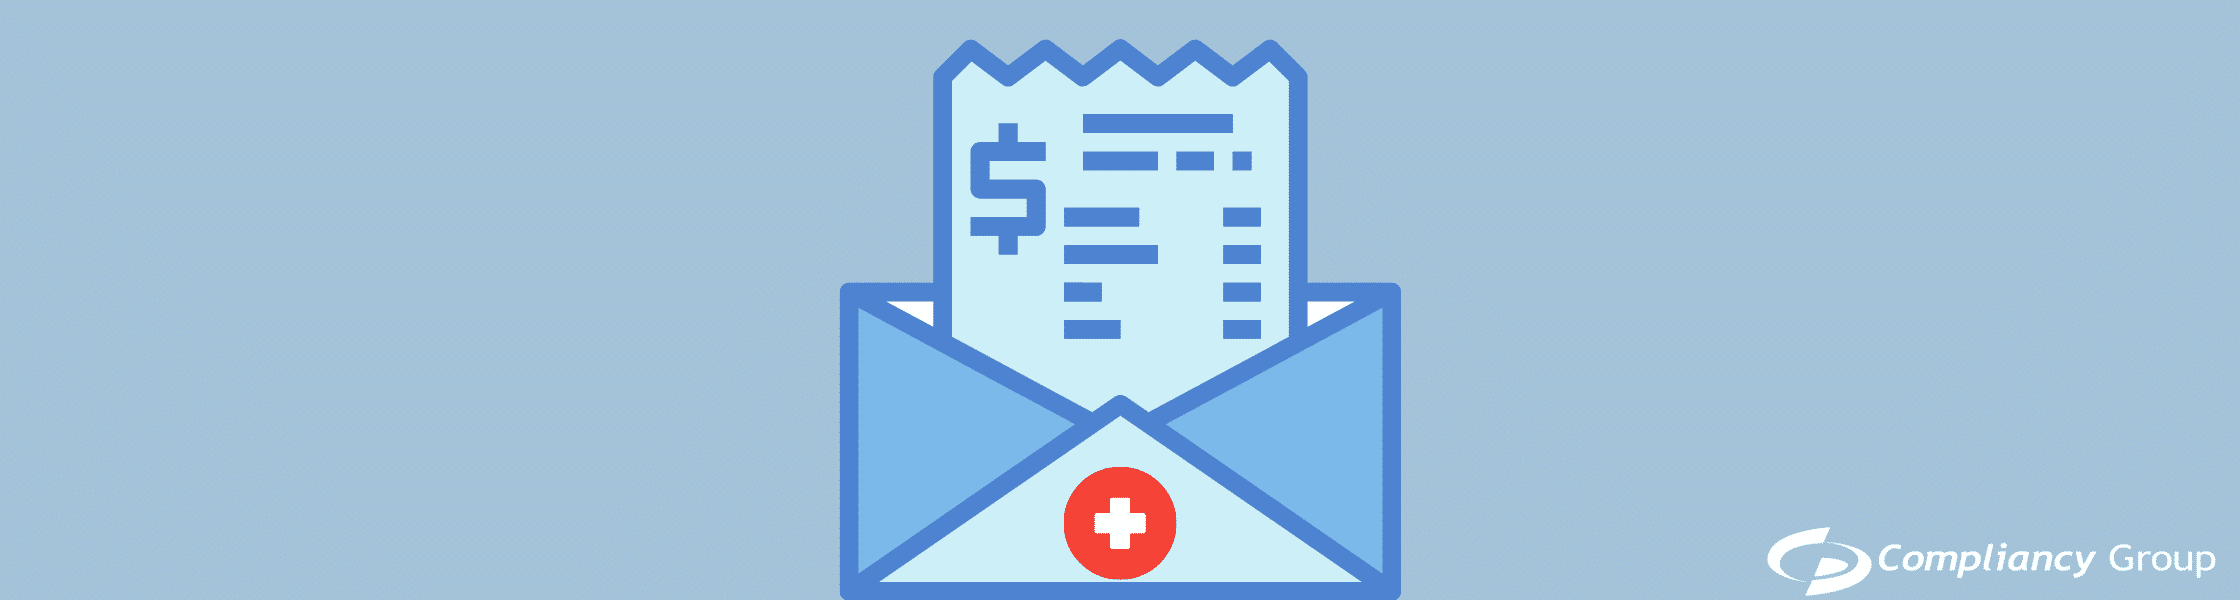 $2.175 Million HIPAA Fine Issued for Improper Breach Notification